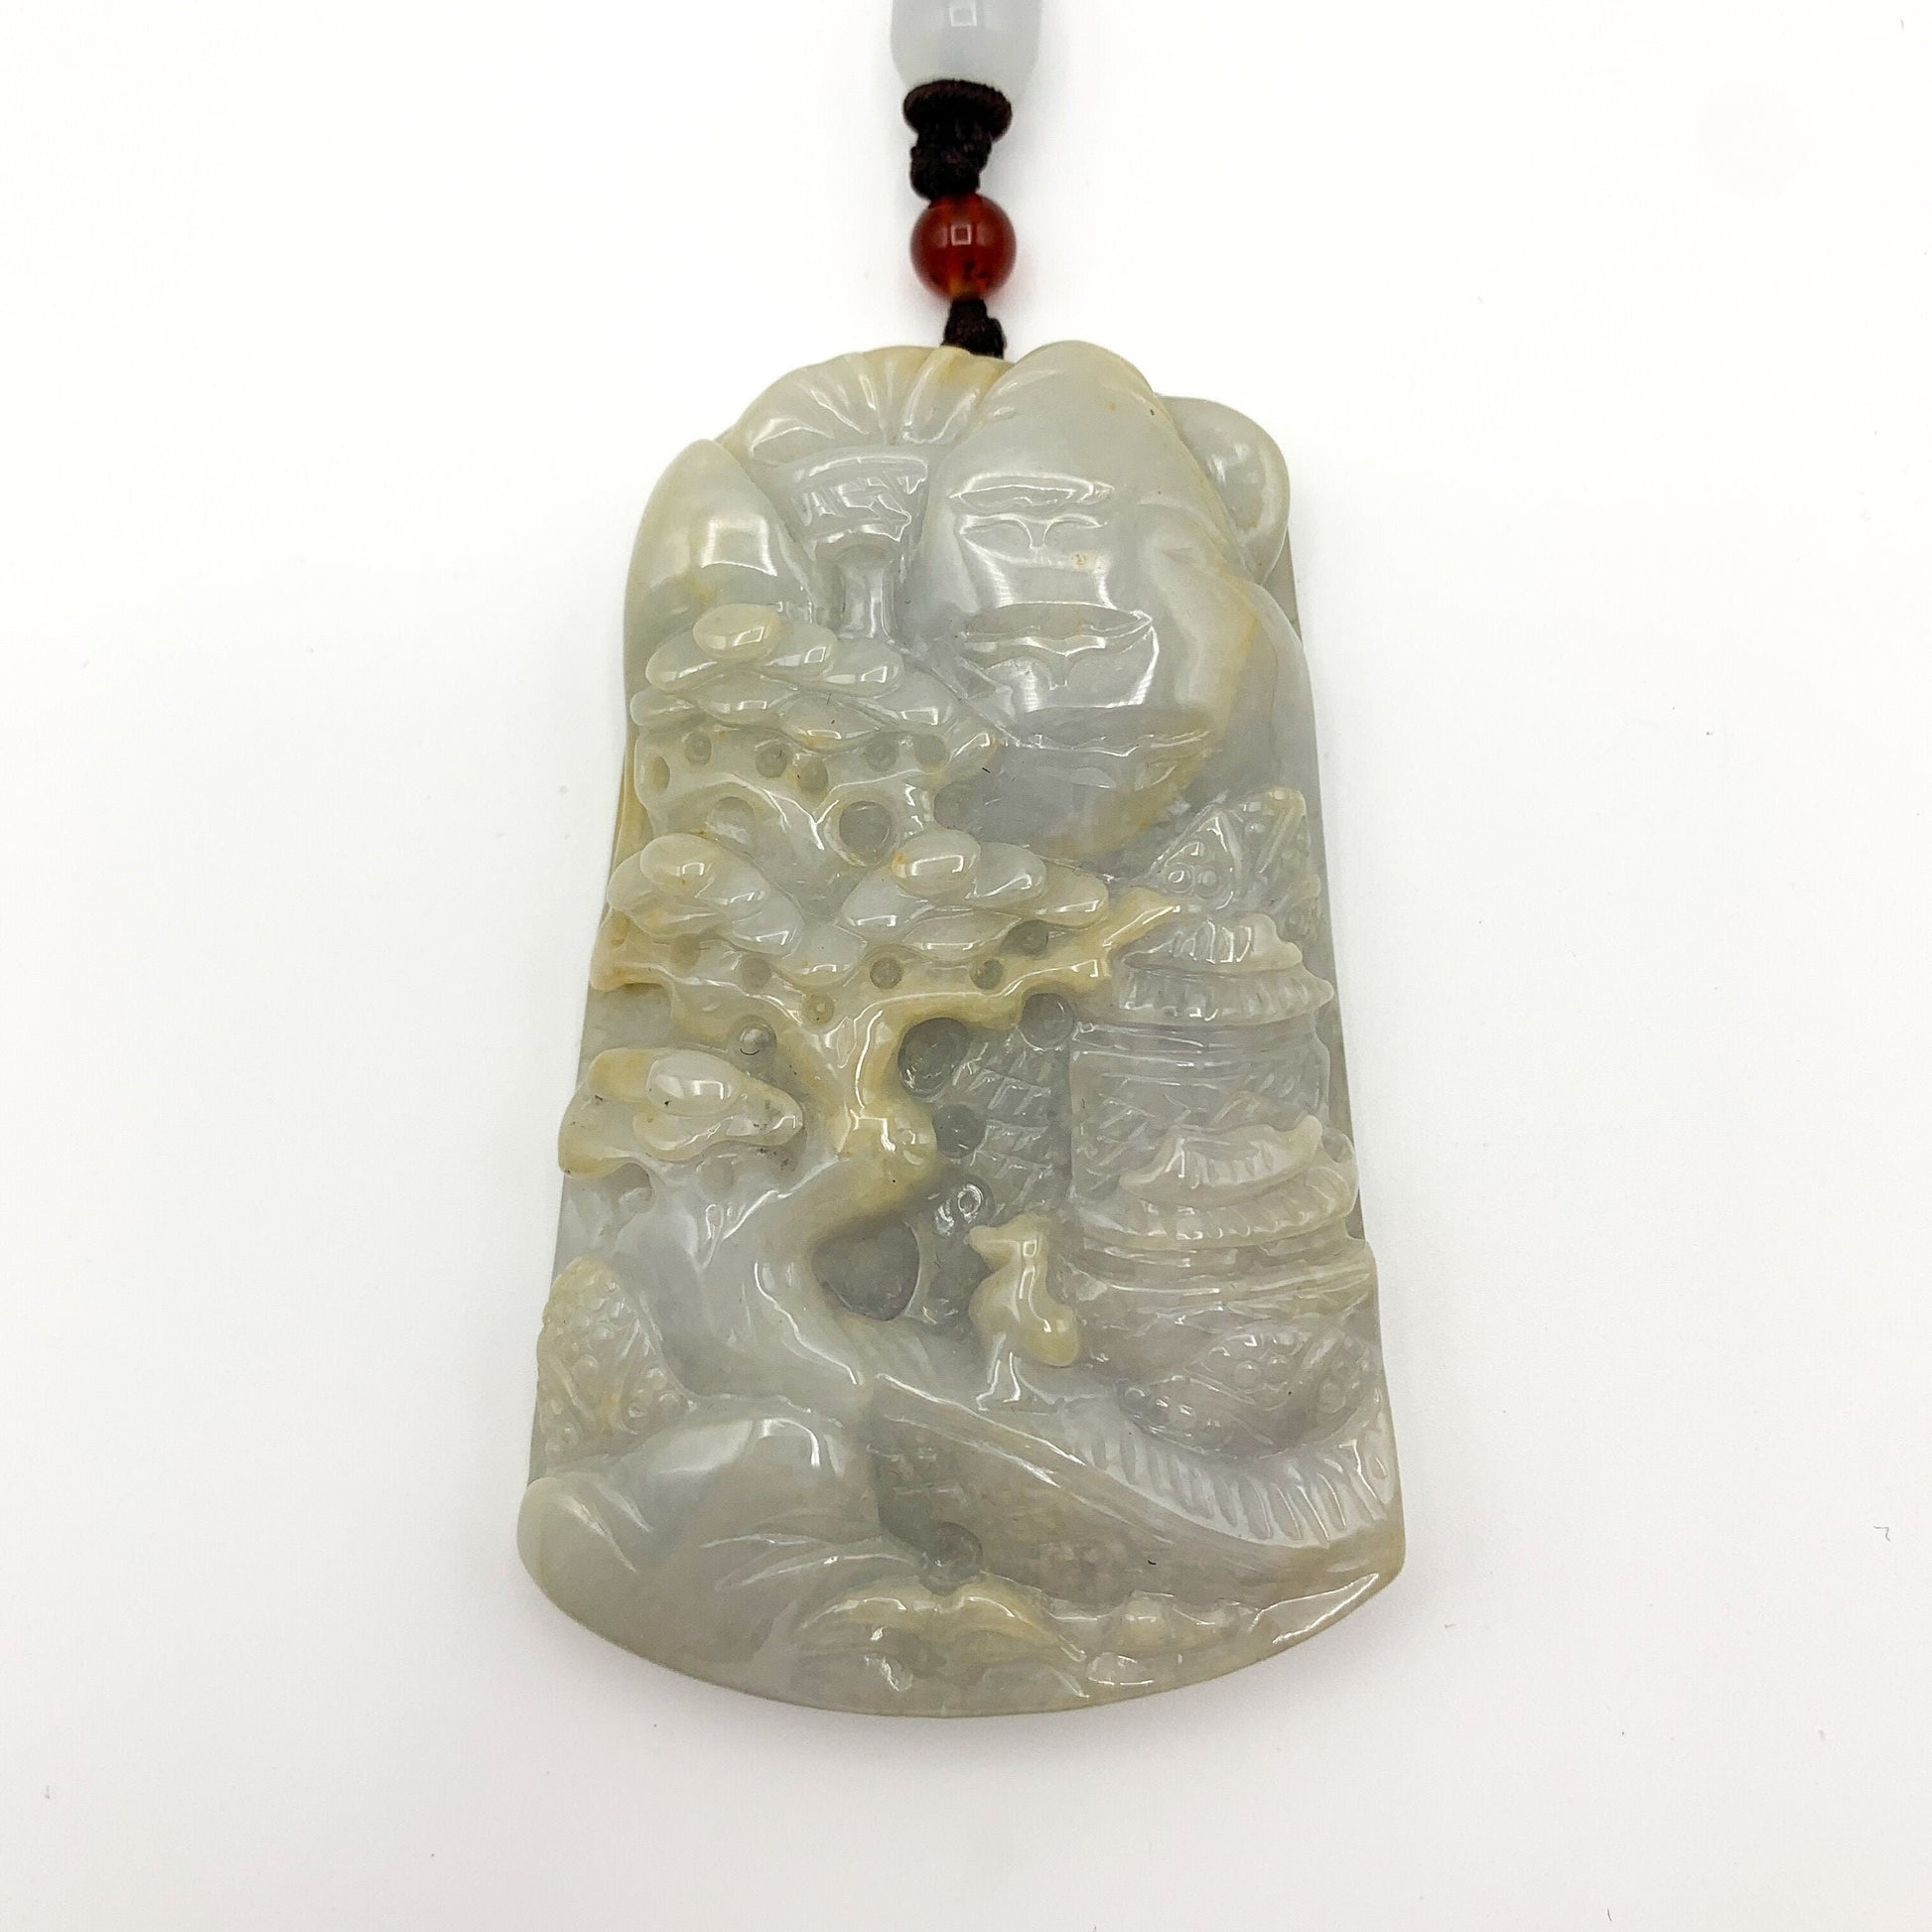 Jade Tree Pendant, Jadeite Jade, Mountain Forest River Scenery, Hand Carved Pendant Necklace, YJ-0321-0359711 - AriaDesignCollection